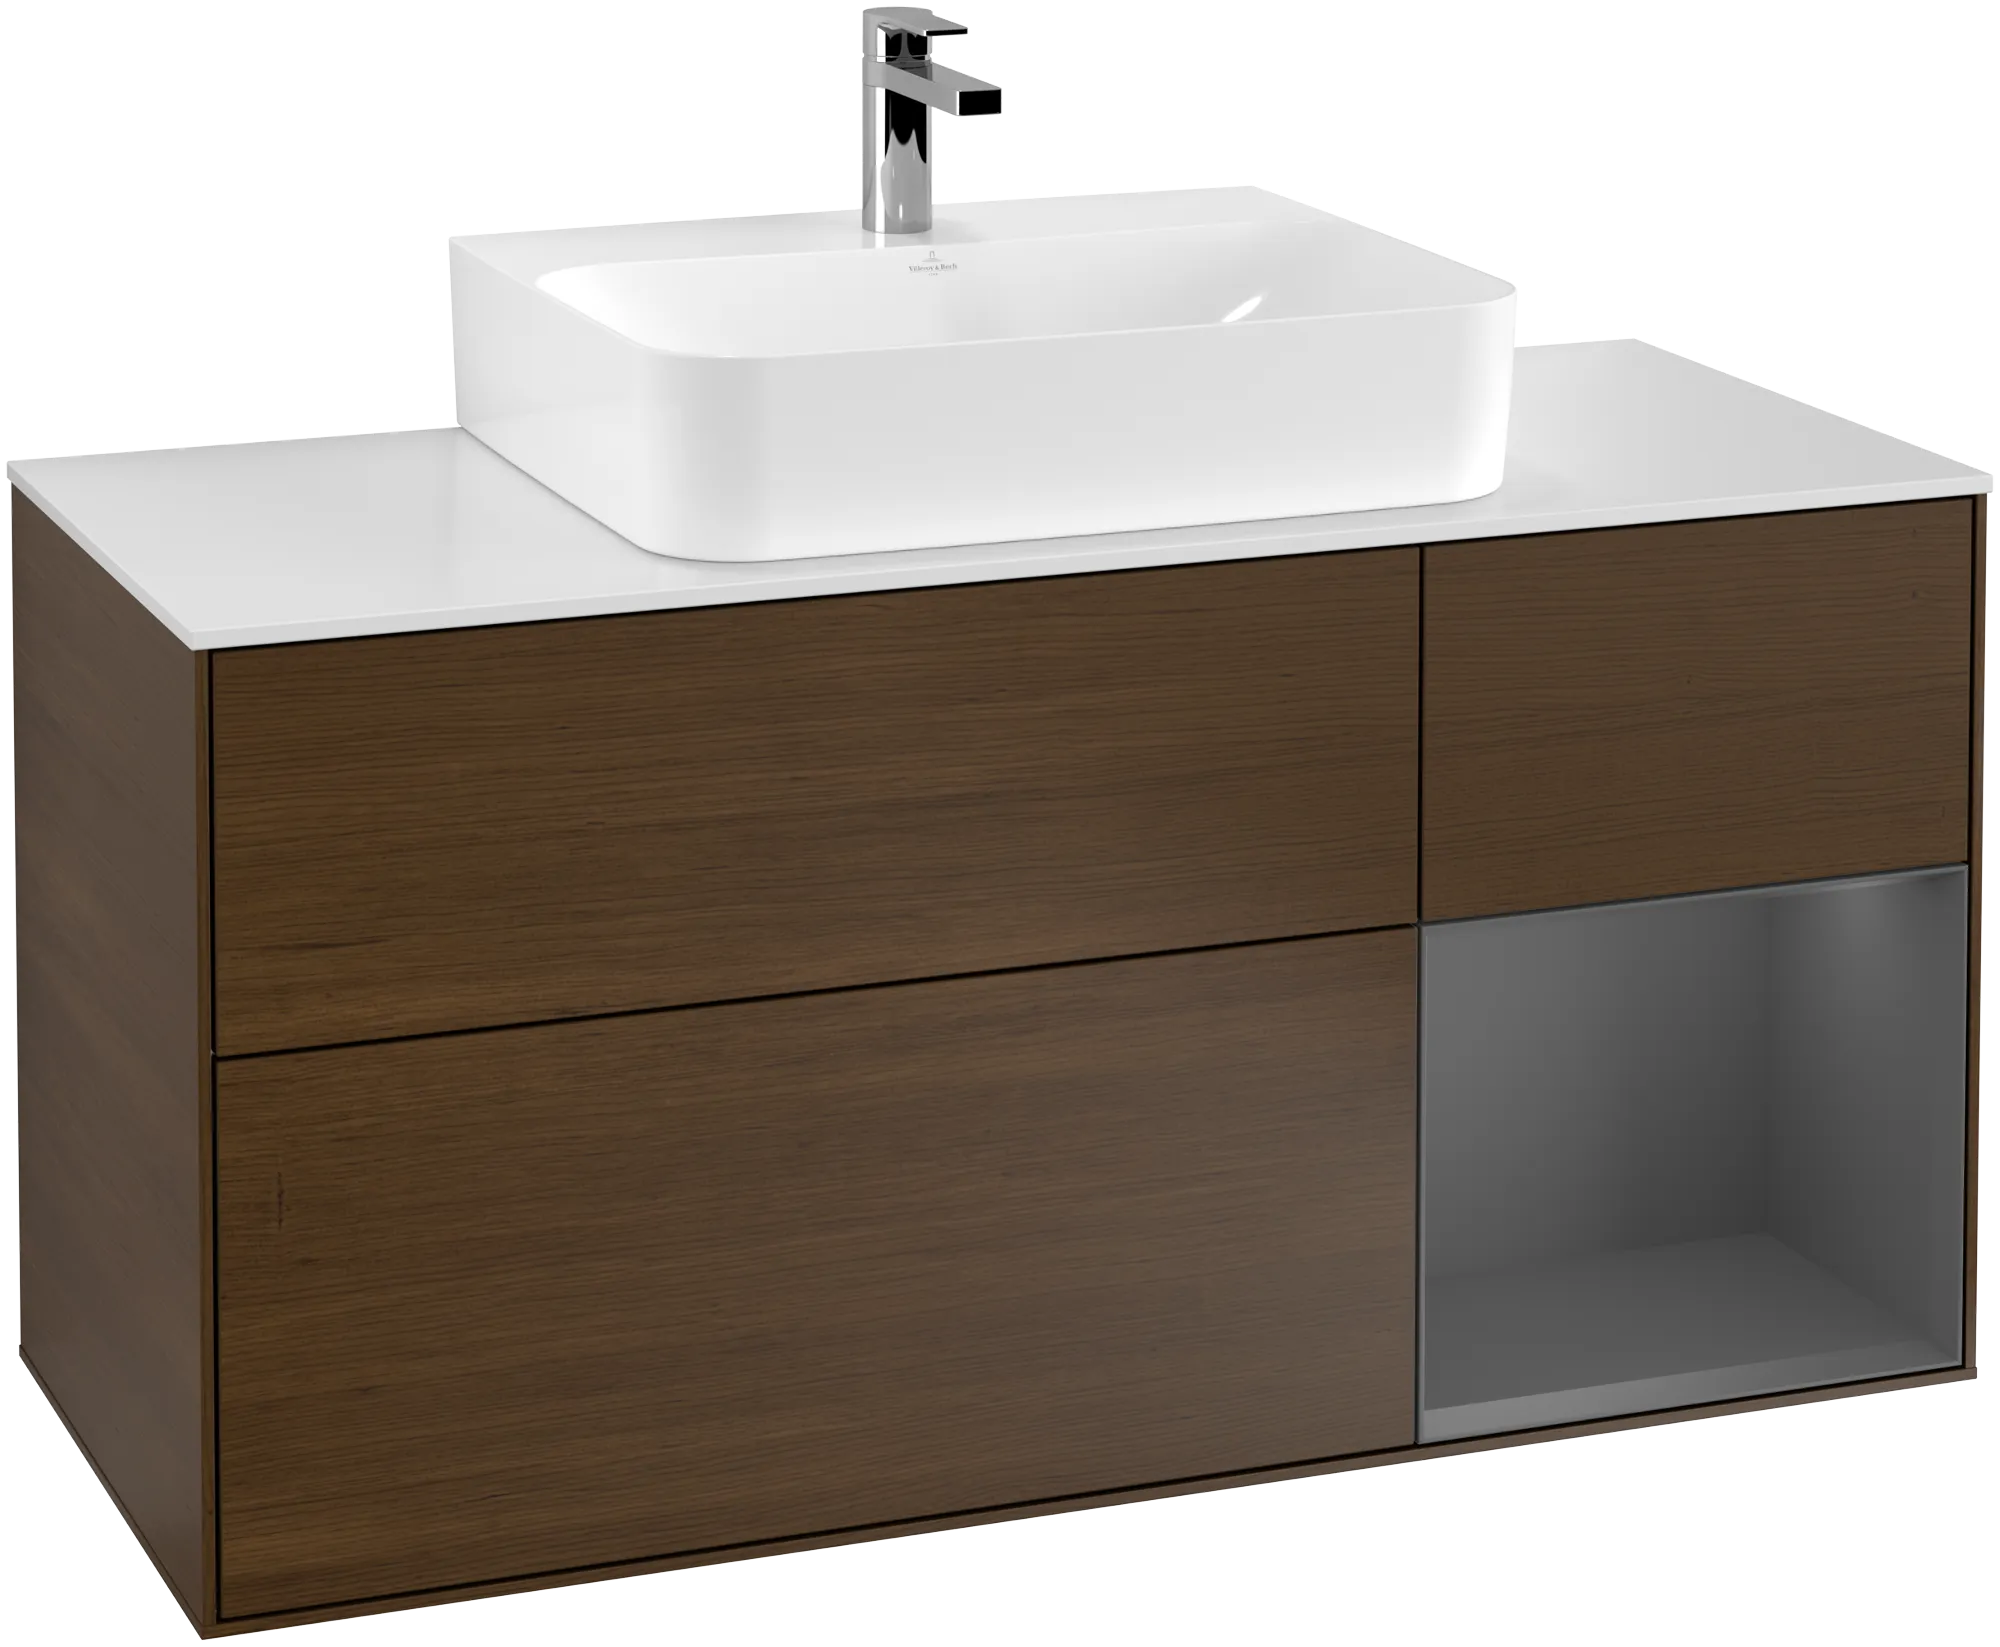 VILLEROY BOCH Finion Vanity unit, with lighting, 3 pull-out compartments, 1200 x 603 x 501 mm, Walnut Veneer / Anthracite Matt Lacquer / Glass White Matt #G171GKGN resmi